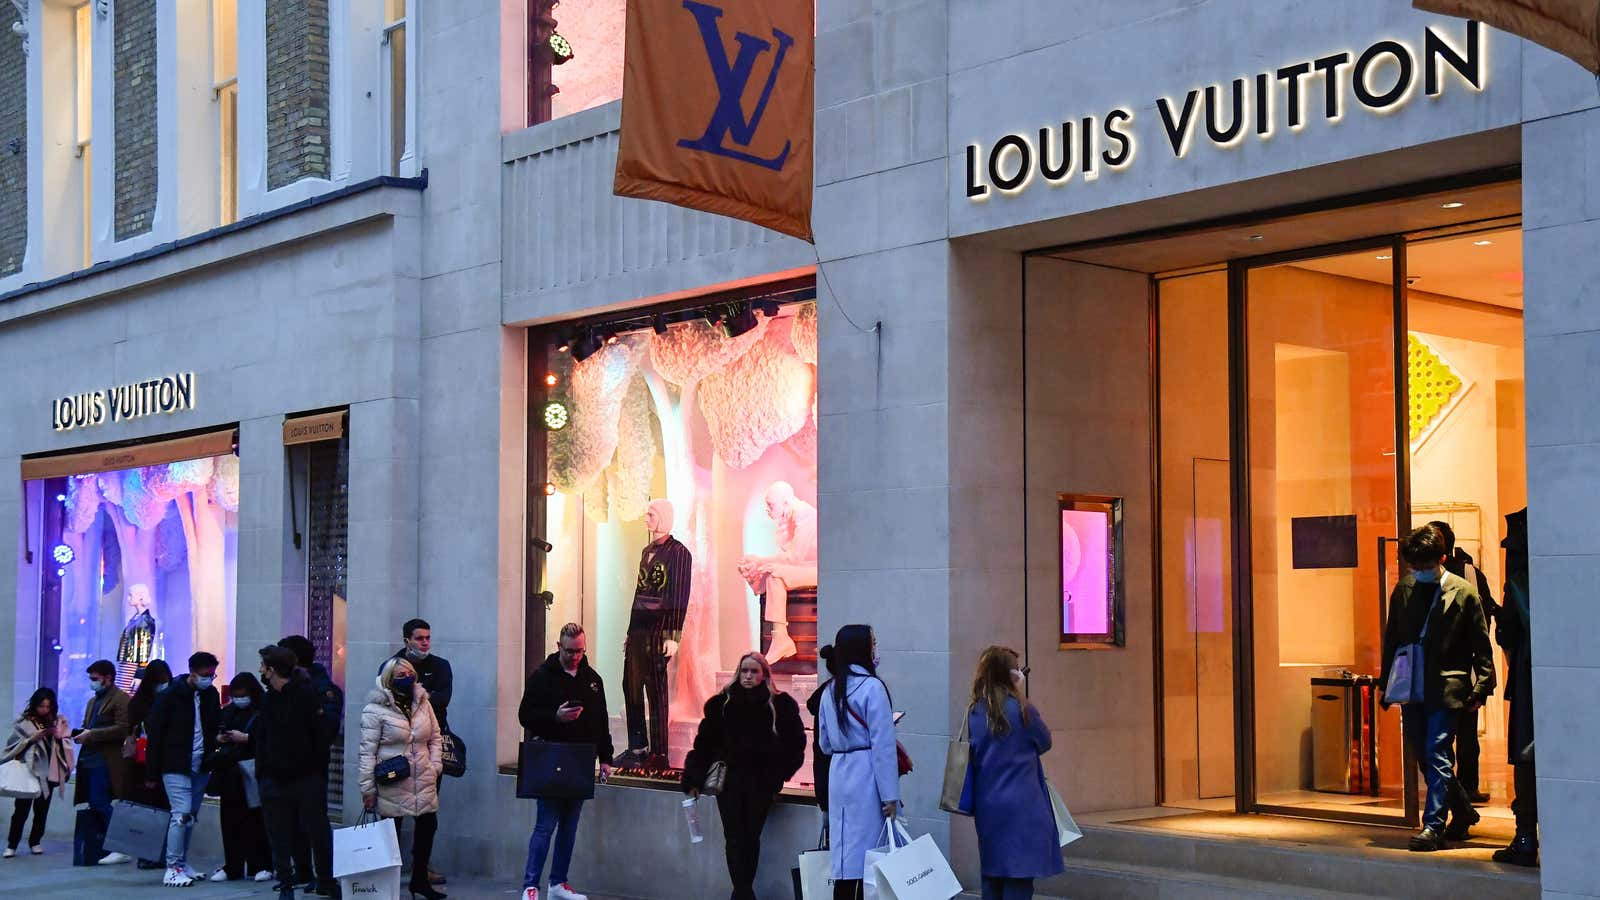 Louis Vuitton and Dior are already rebounding from the pandemic